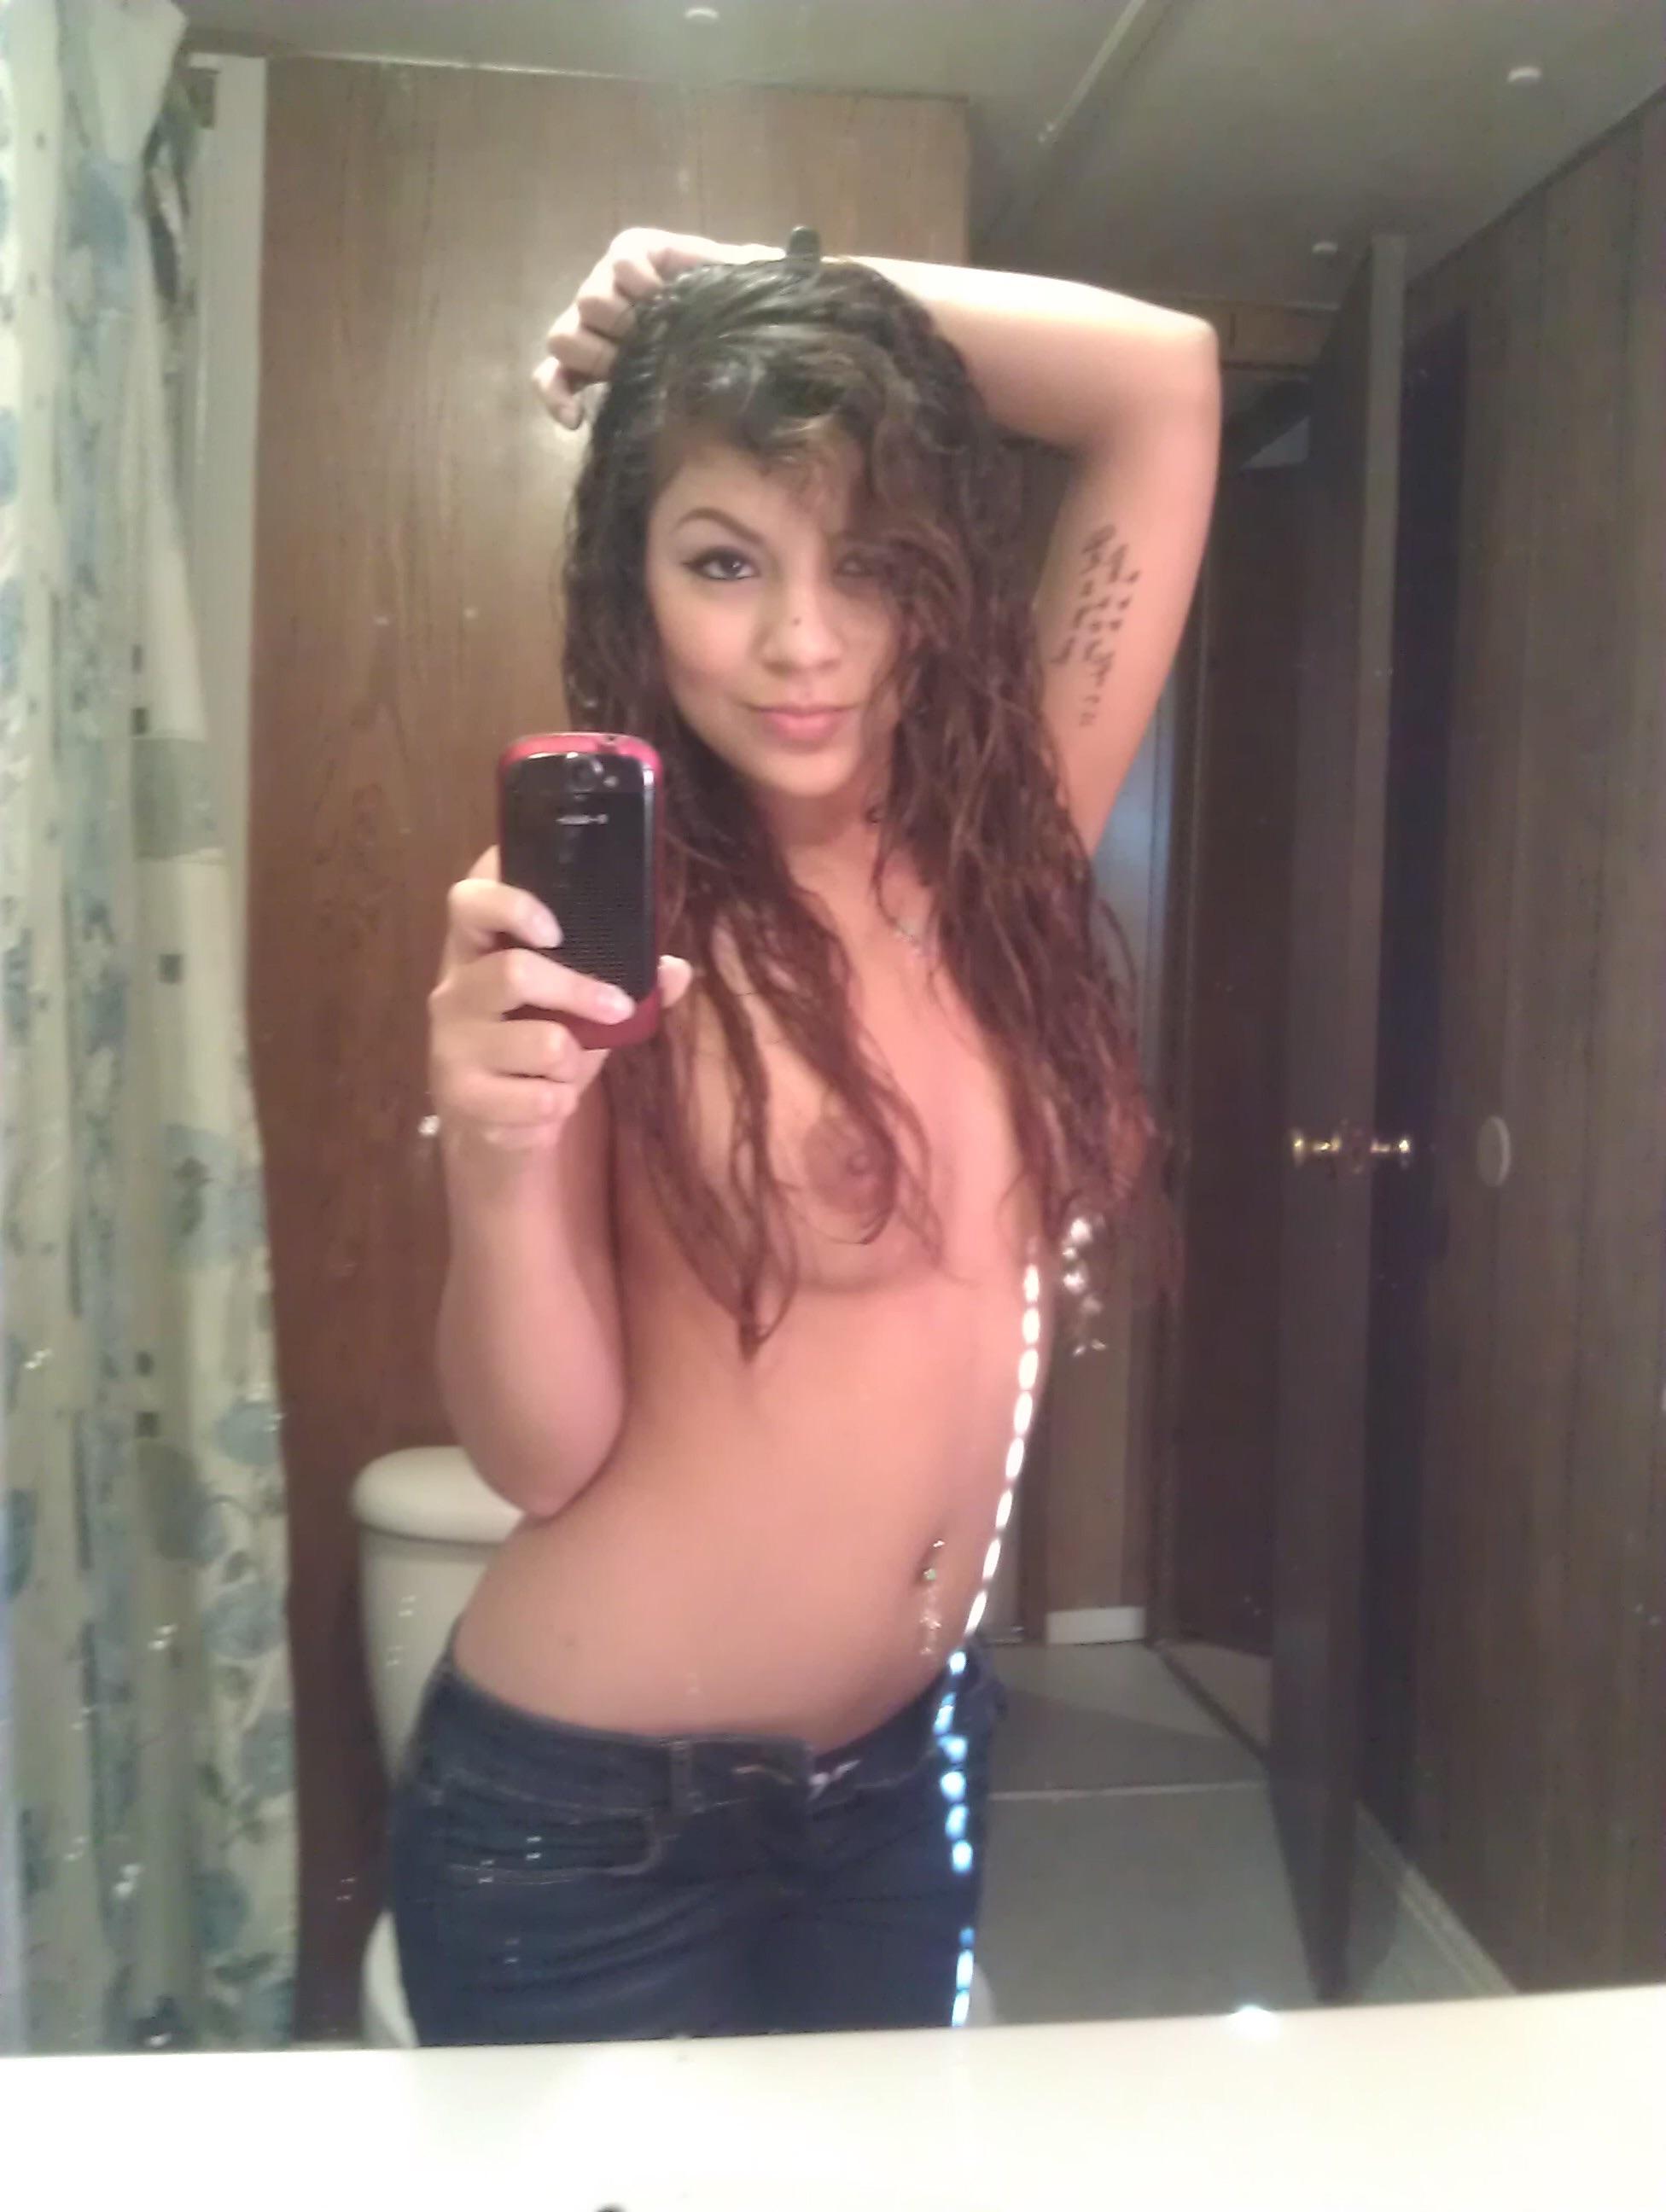 teen girls nude photos with cell phones